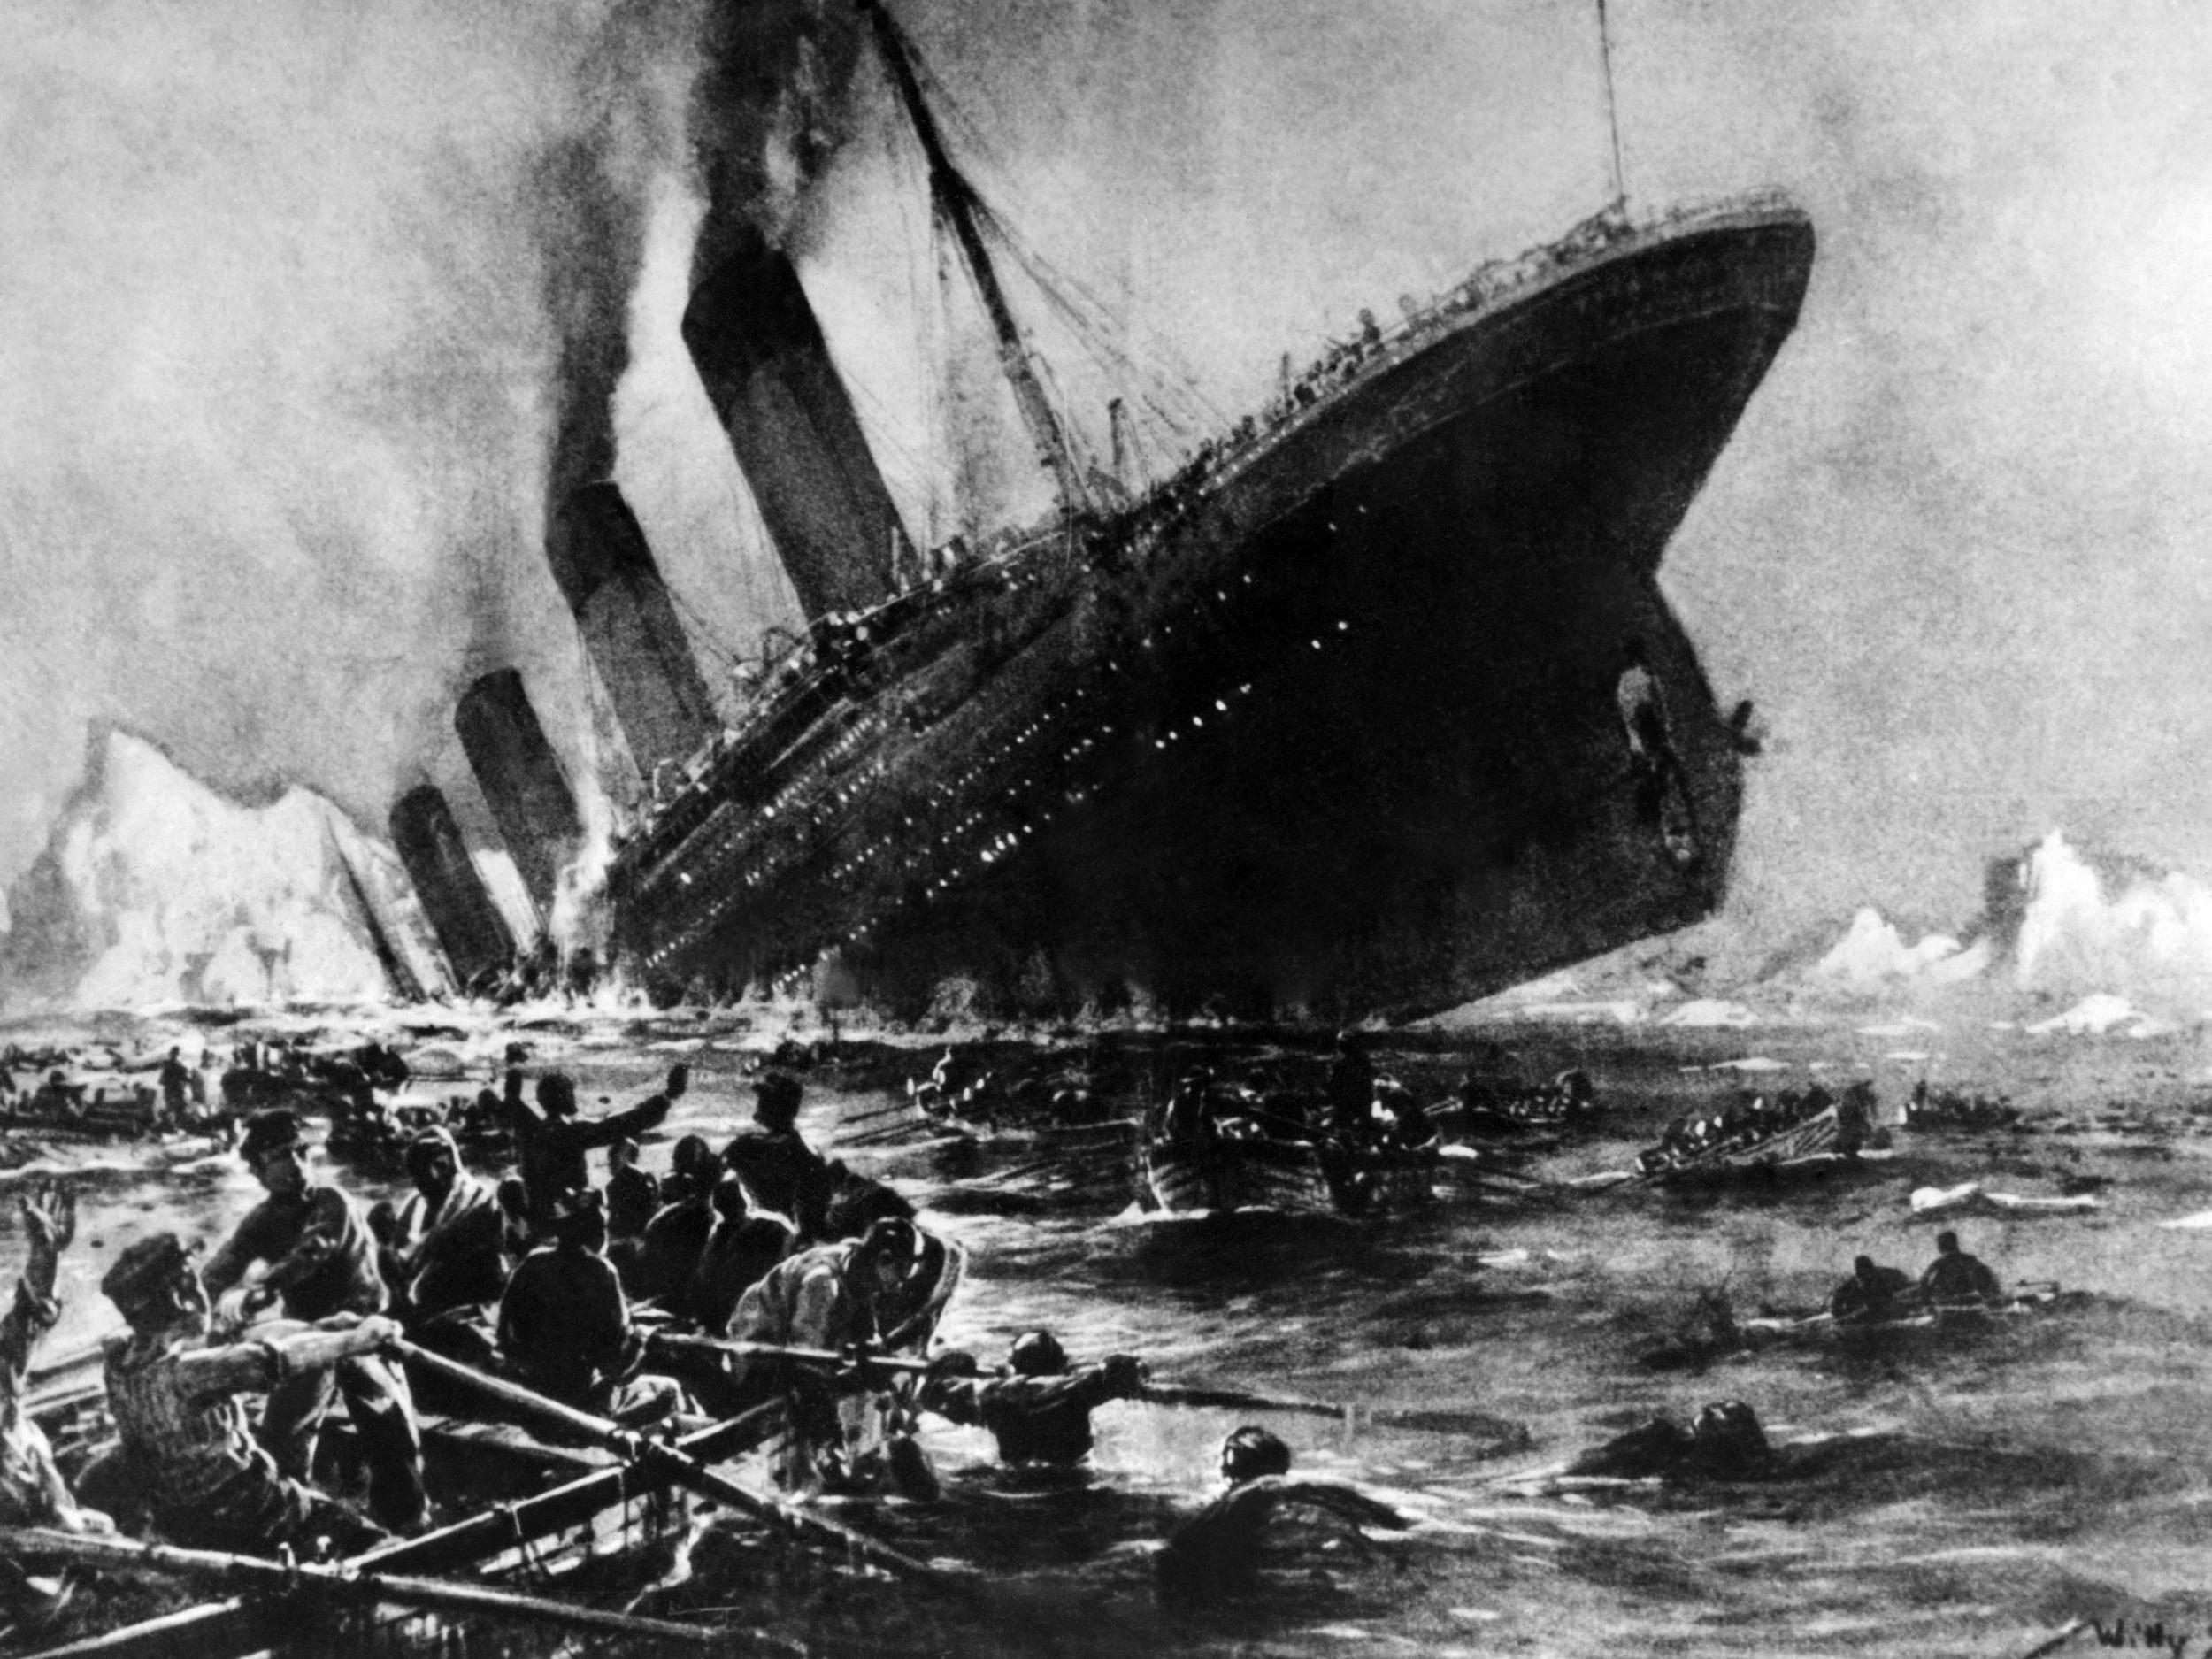 Artist impression showing the 14 April 1912 shipwreck of the British luxury passenger liner Titanic off the Nova-Scotia coasts, during its maiden voyage